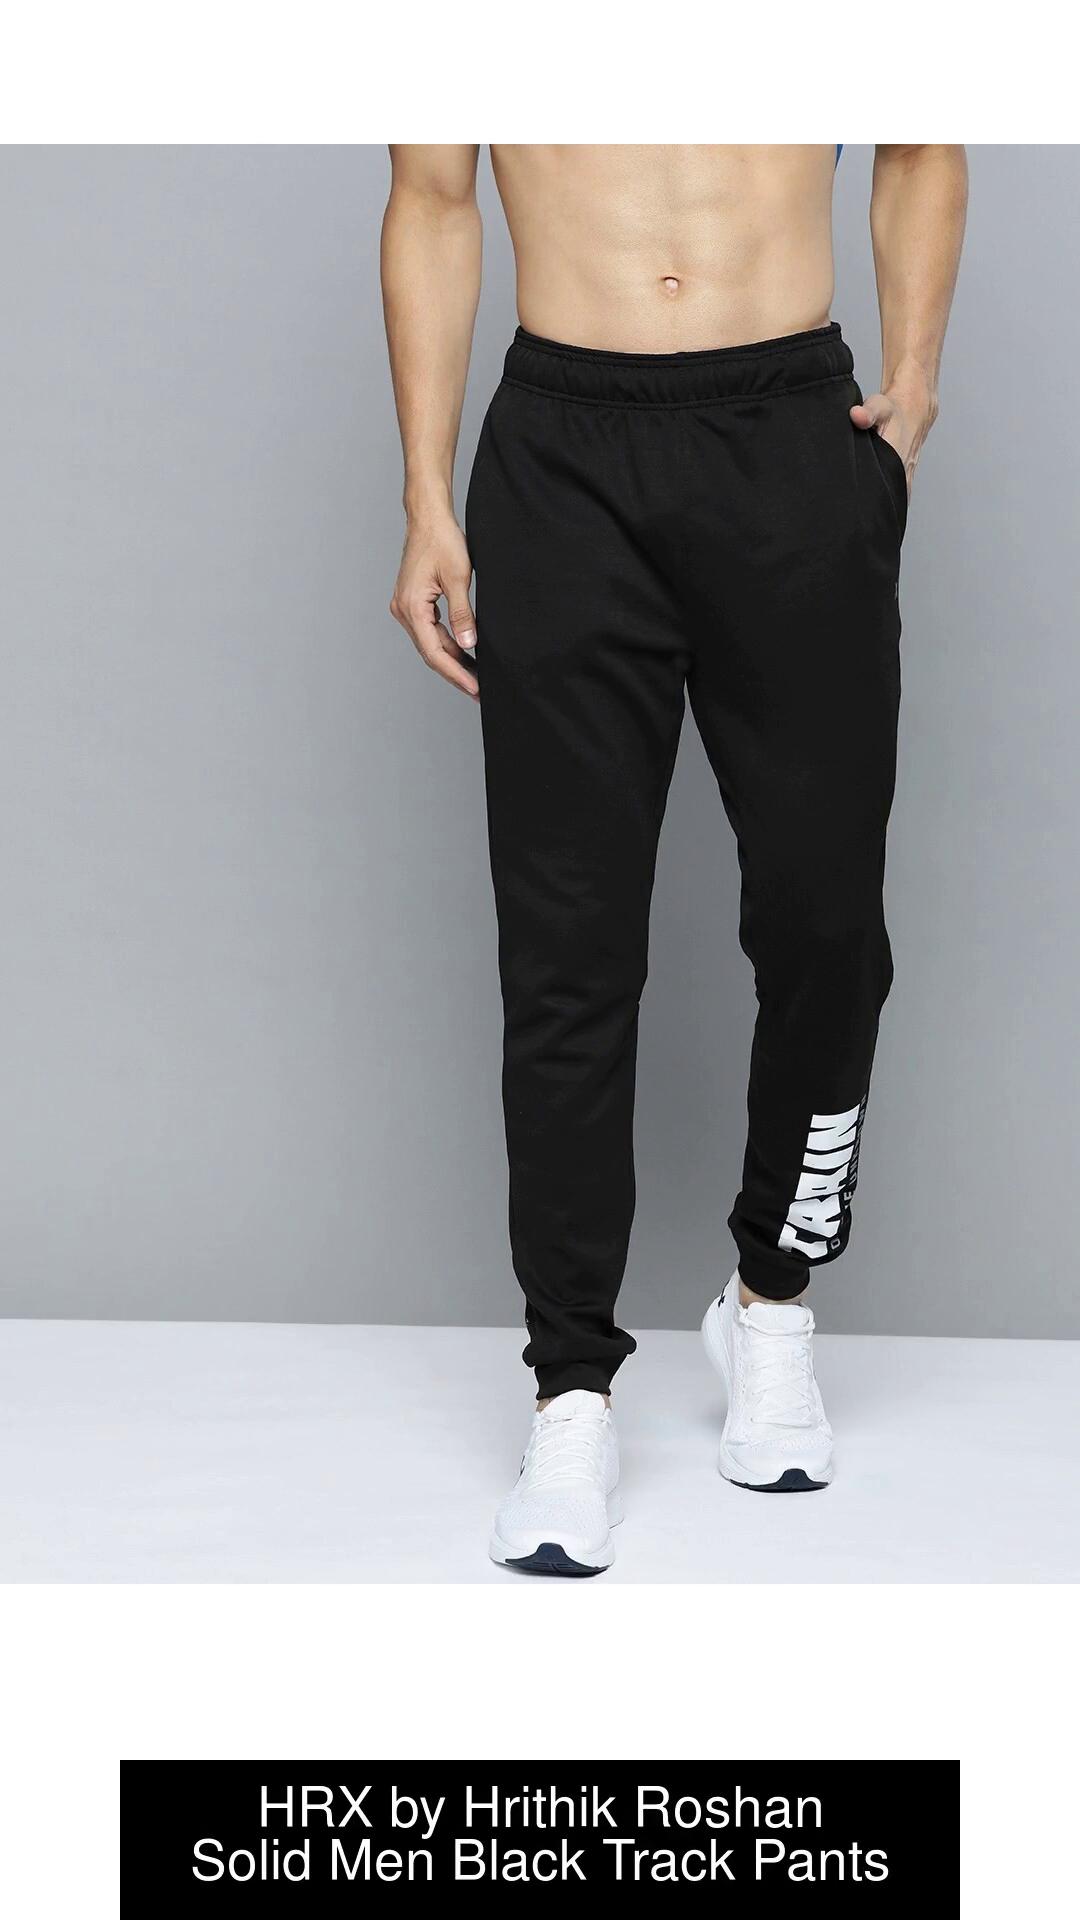 HRX by Hrithik Roshan Solid Men Black Track Pants  Buy HRX by Hrithik  Roshan Solid Men Black Track Pants Online at Best Prices in India   Shopsyin